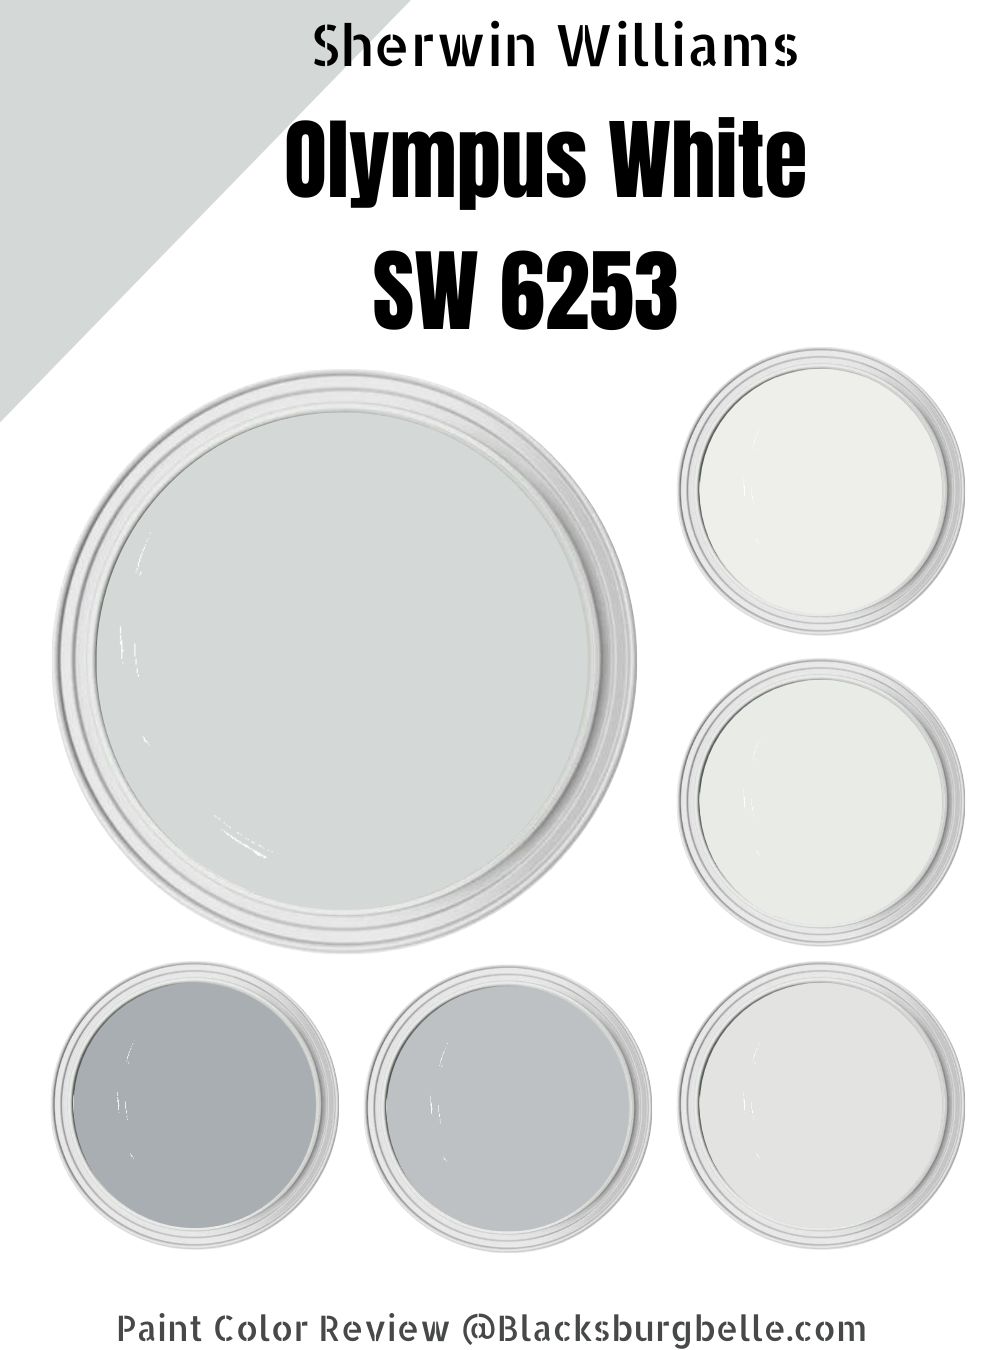 Sherwin Williams Olympus White (SW 6253) Paint Color Review